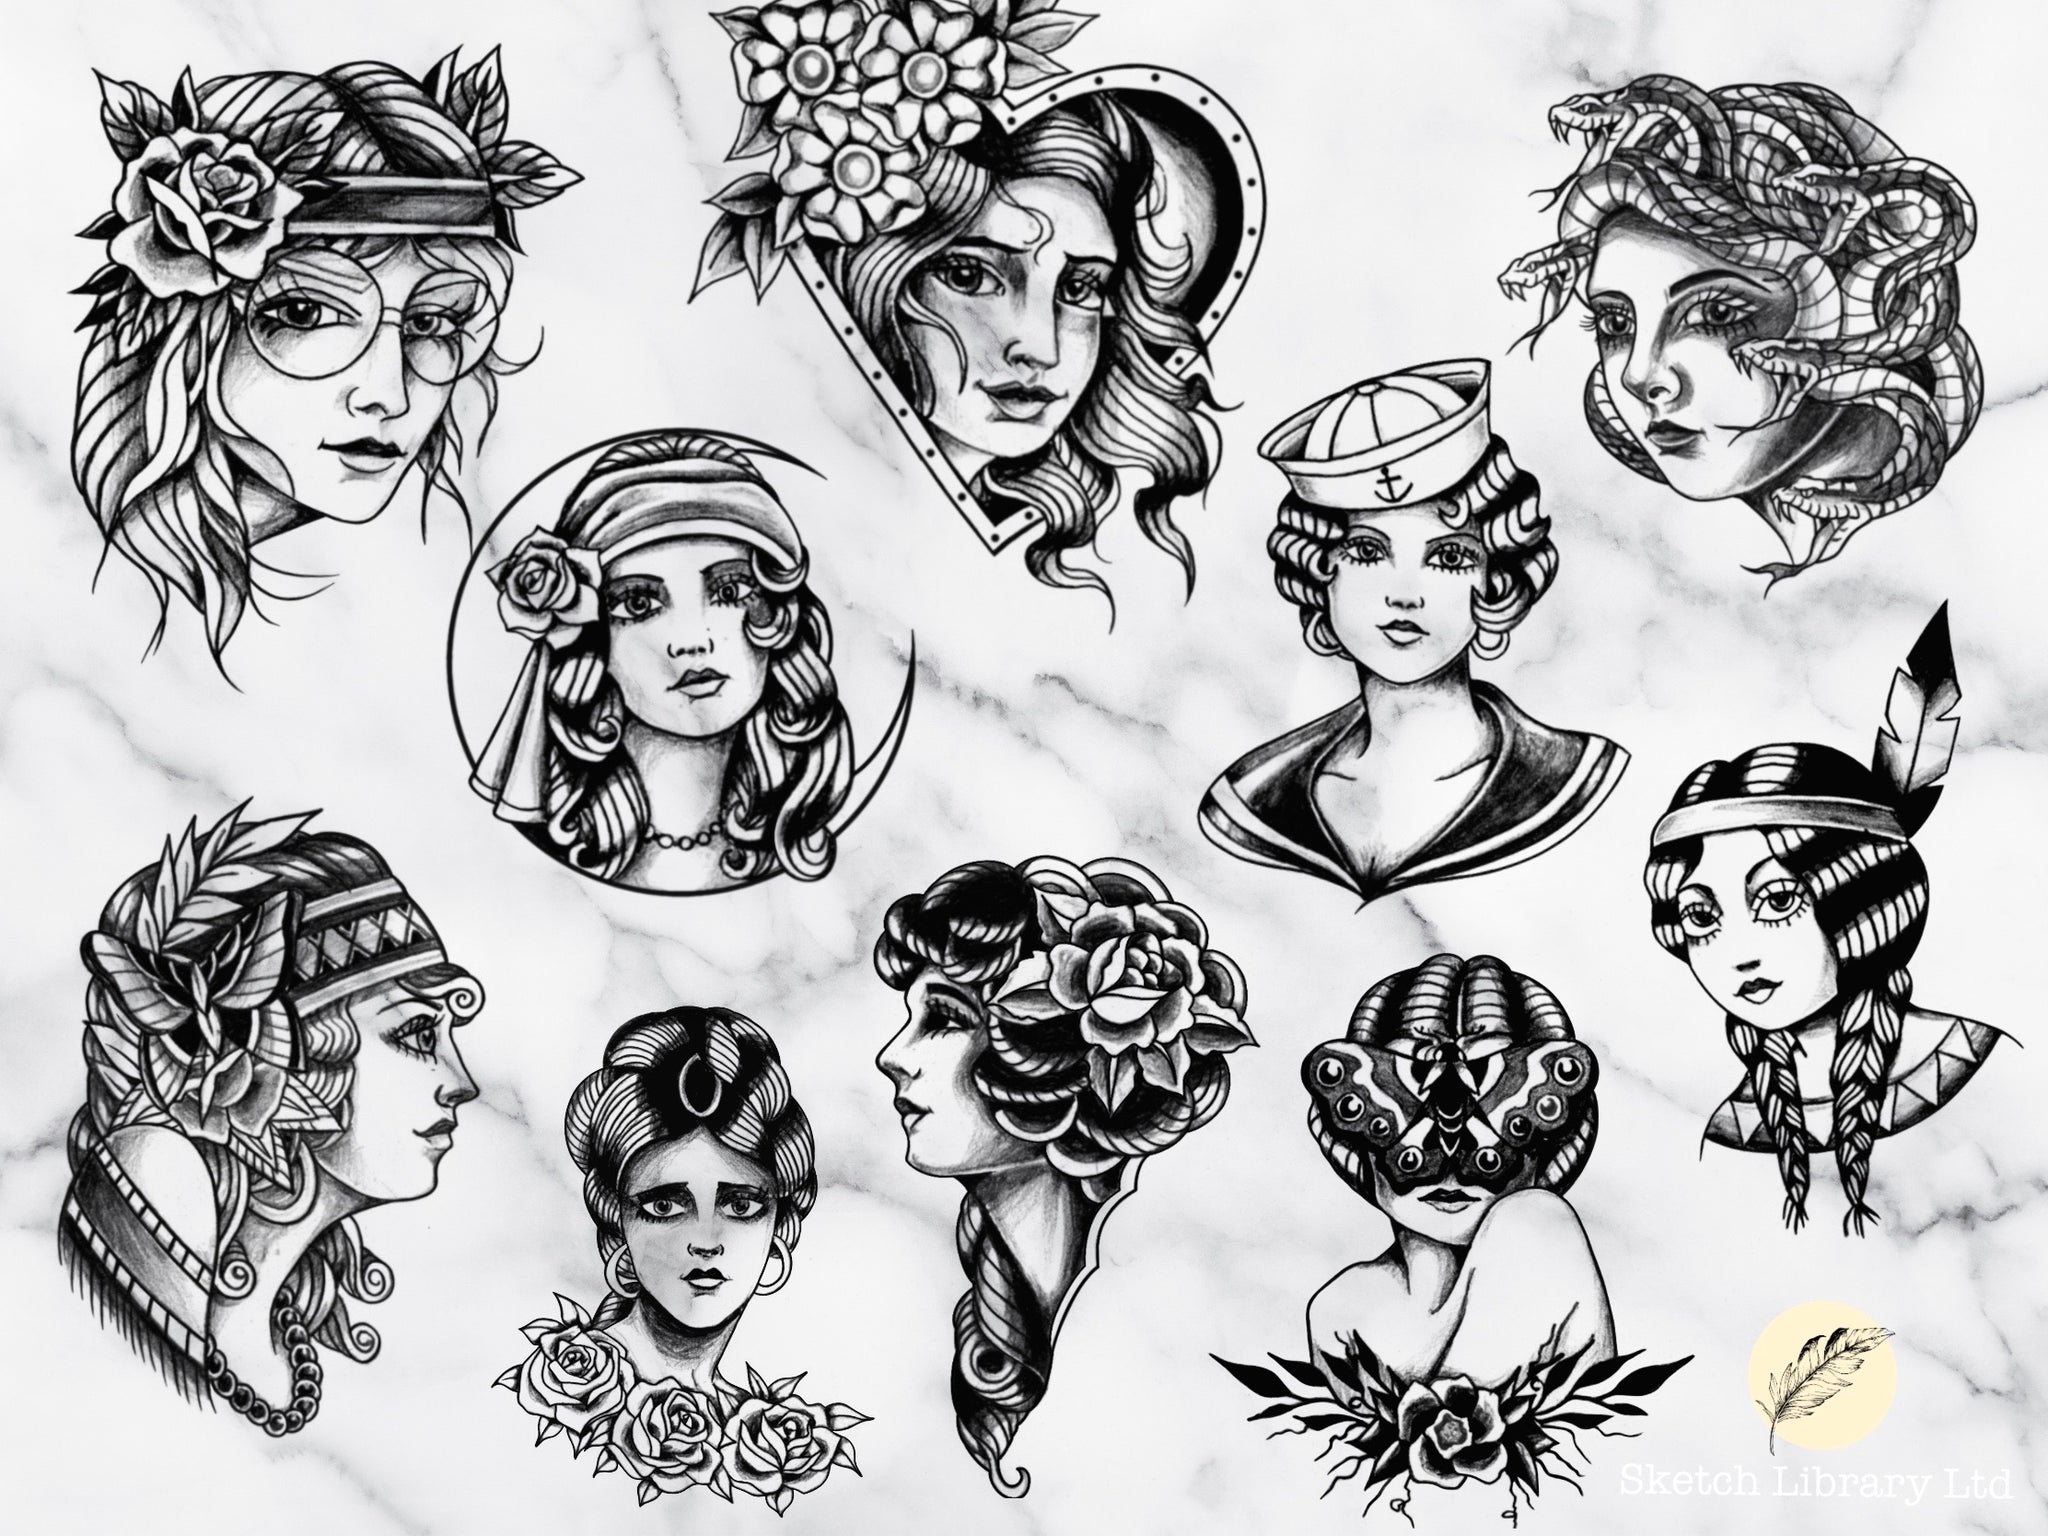 18 Traditional Girls Tattoo stamps // Brushes for Procreate